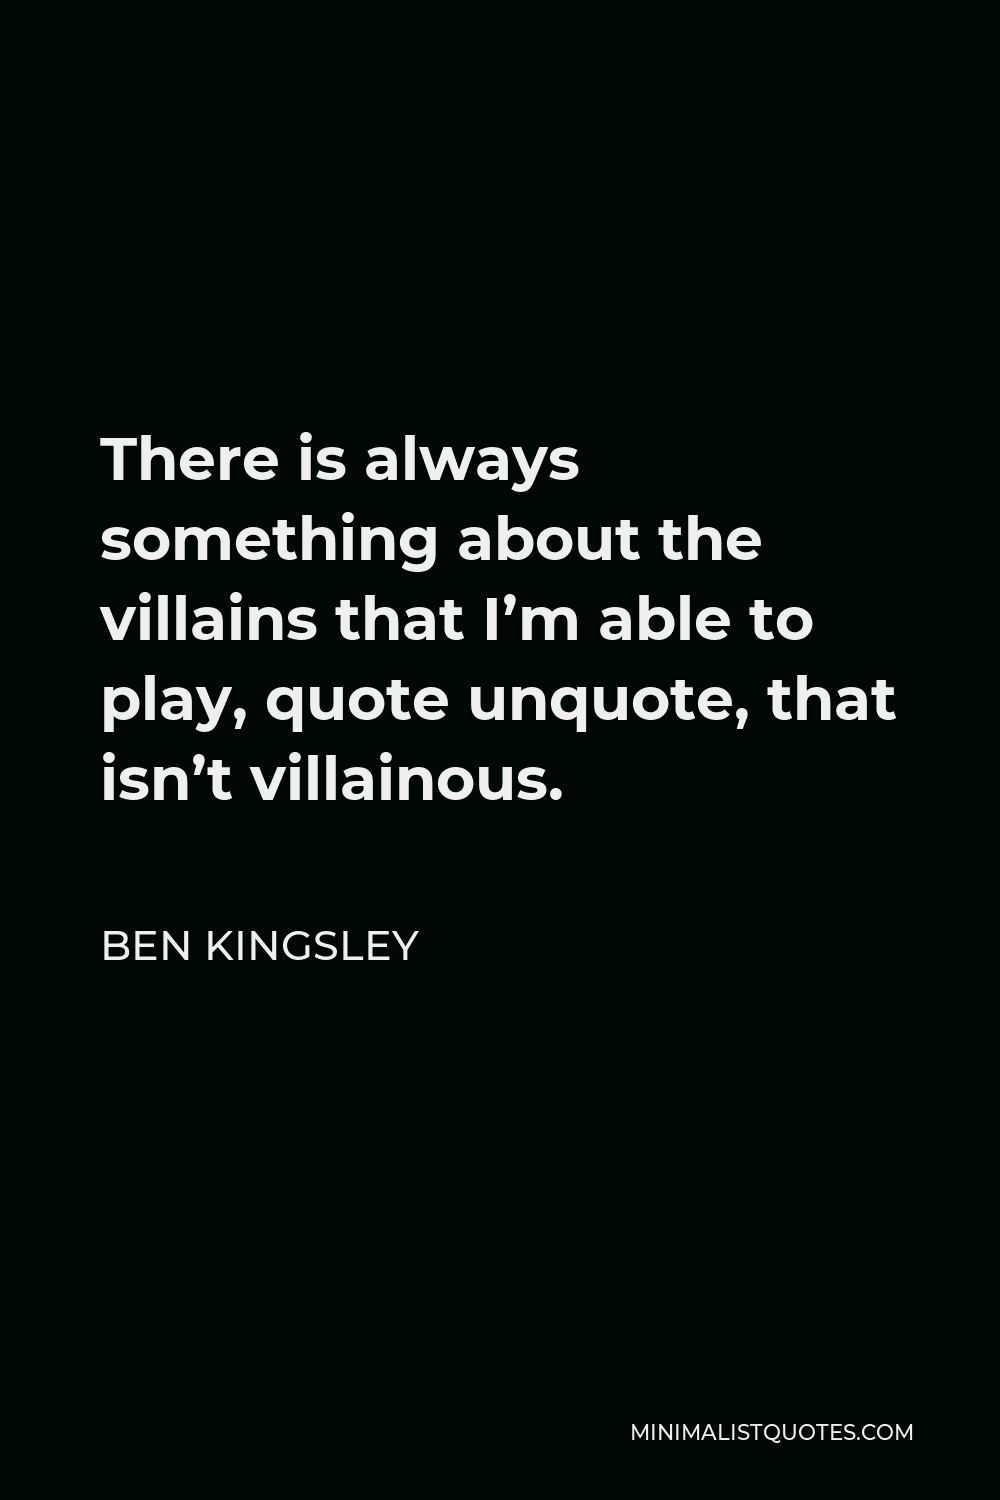 Ben Kingsley Quote - There is always something about the villains that I’m able to play, quote unquote, that isn’t villainous.